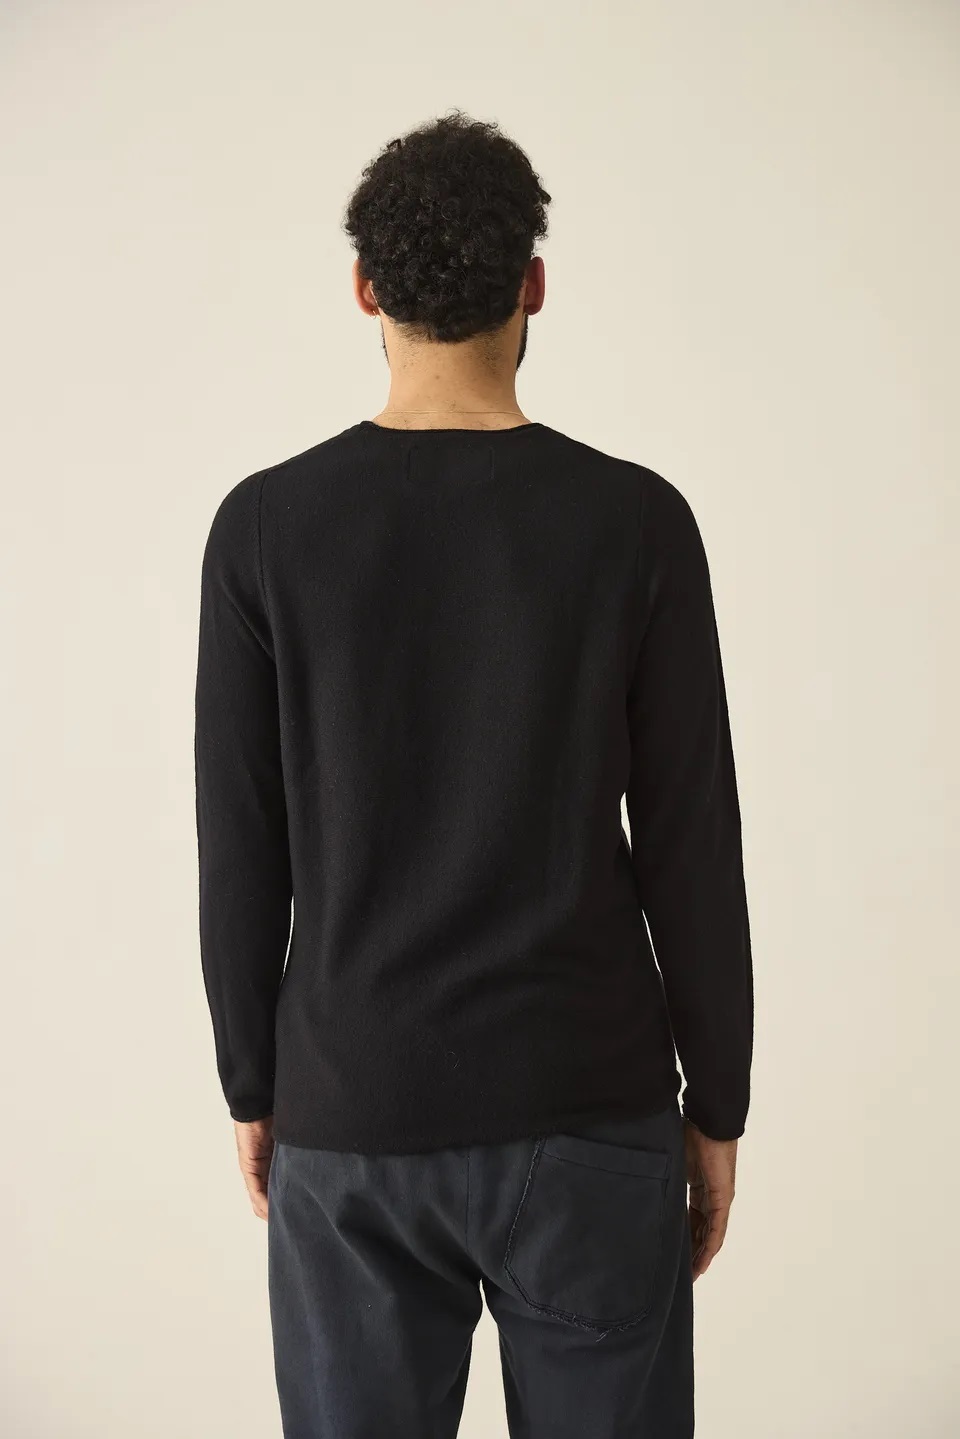 HANNIBAL. Knit Pullover Nevio in Charcoal 54